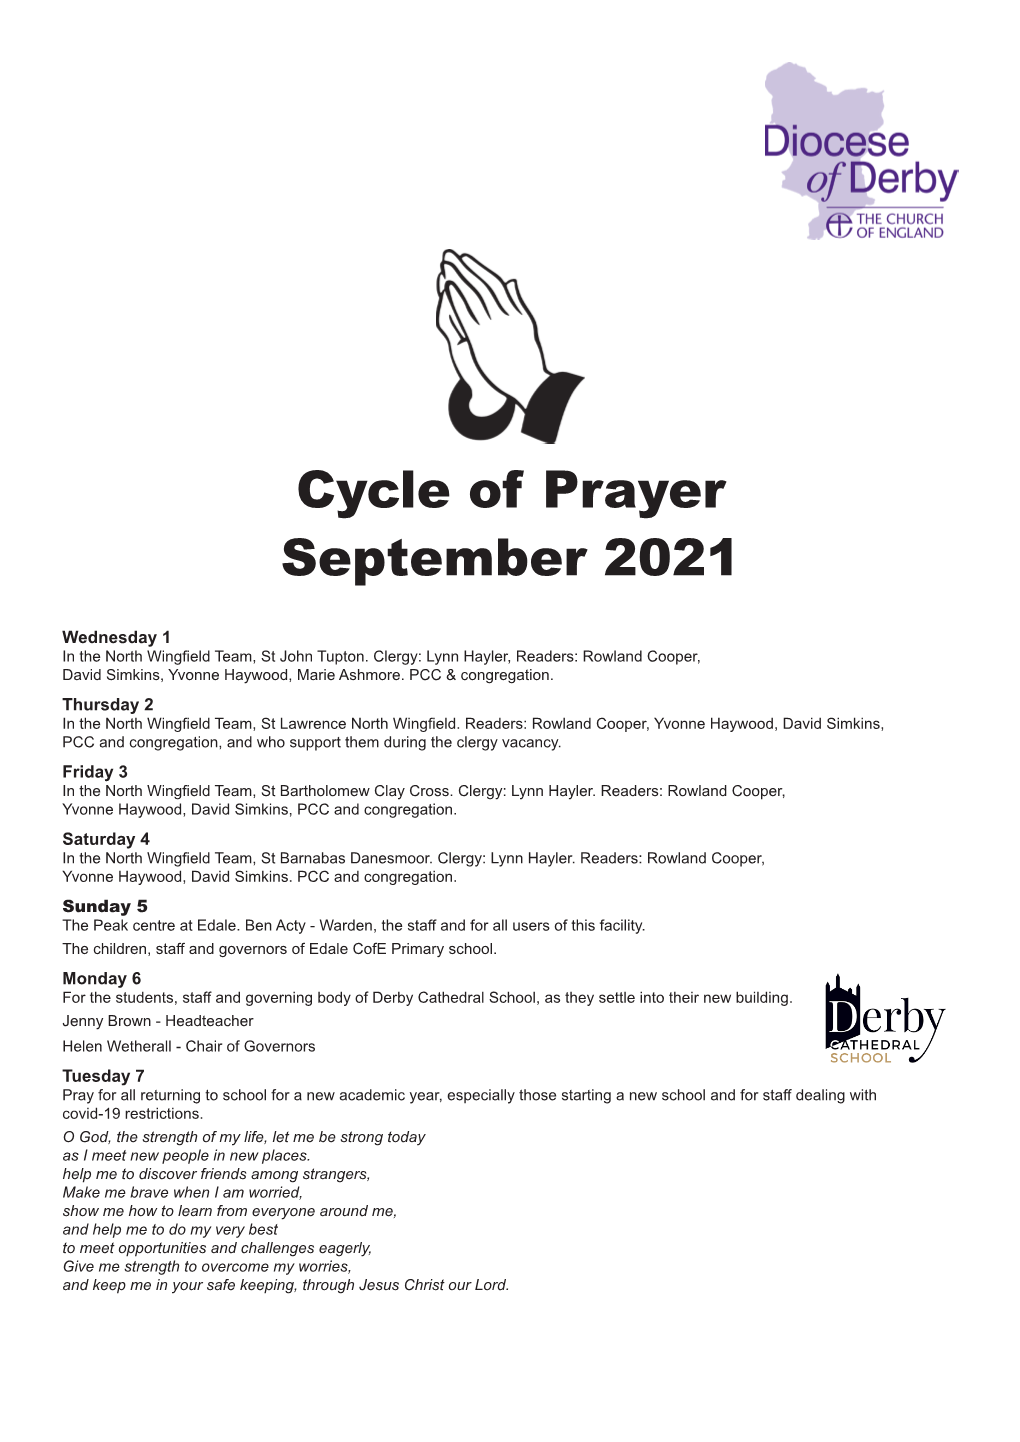 Download the September 2021 Cycle of Prayer